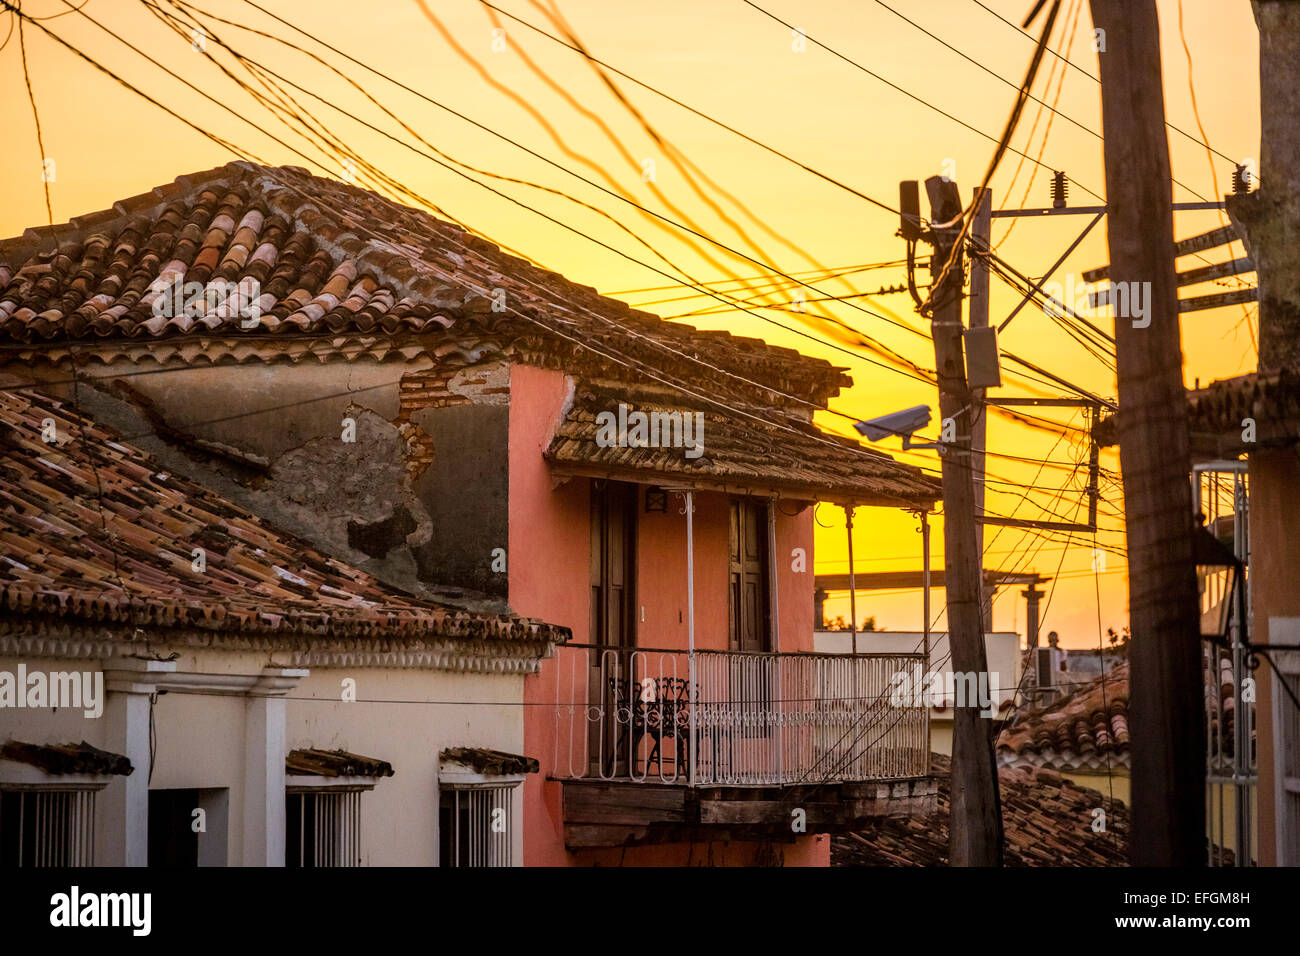 Houses and electric power lines, Trinidad, Cuba Stock Photo